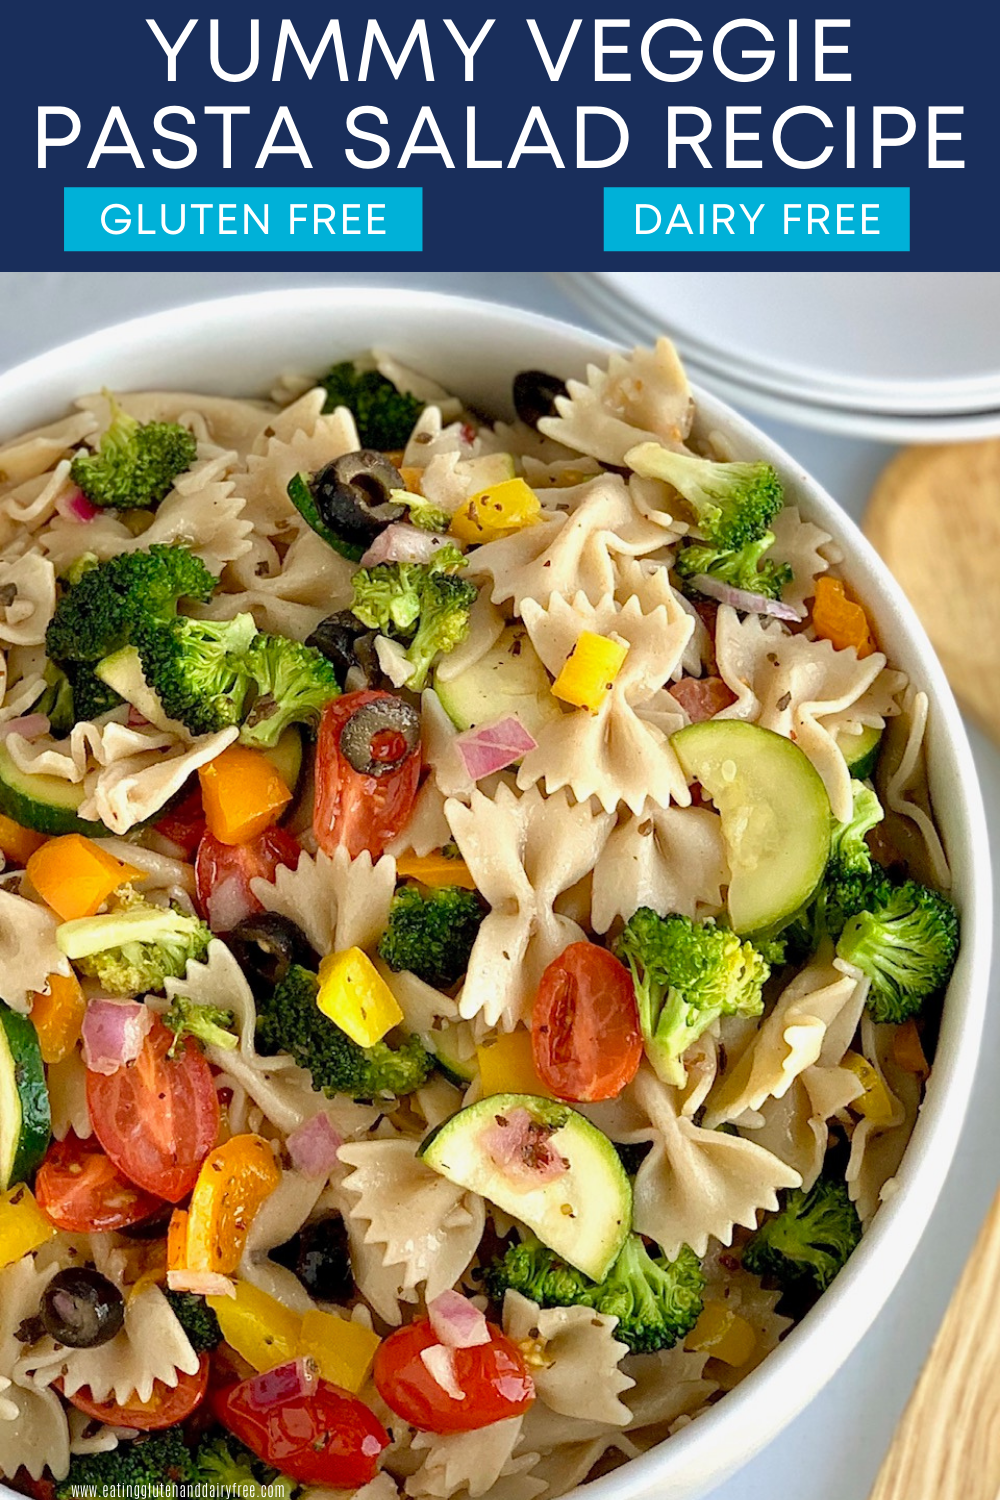 A large white serving bowl of bow tie pasta noodles, diced bell peppers, broccoli, olives, cucumbers, and purple onion with dressing.